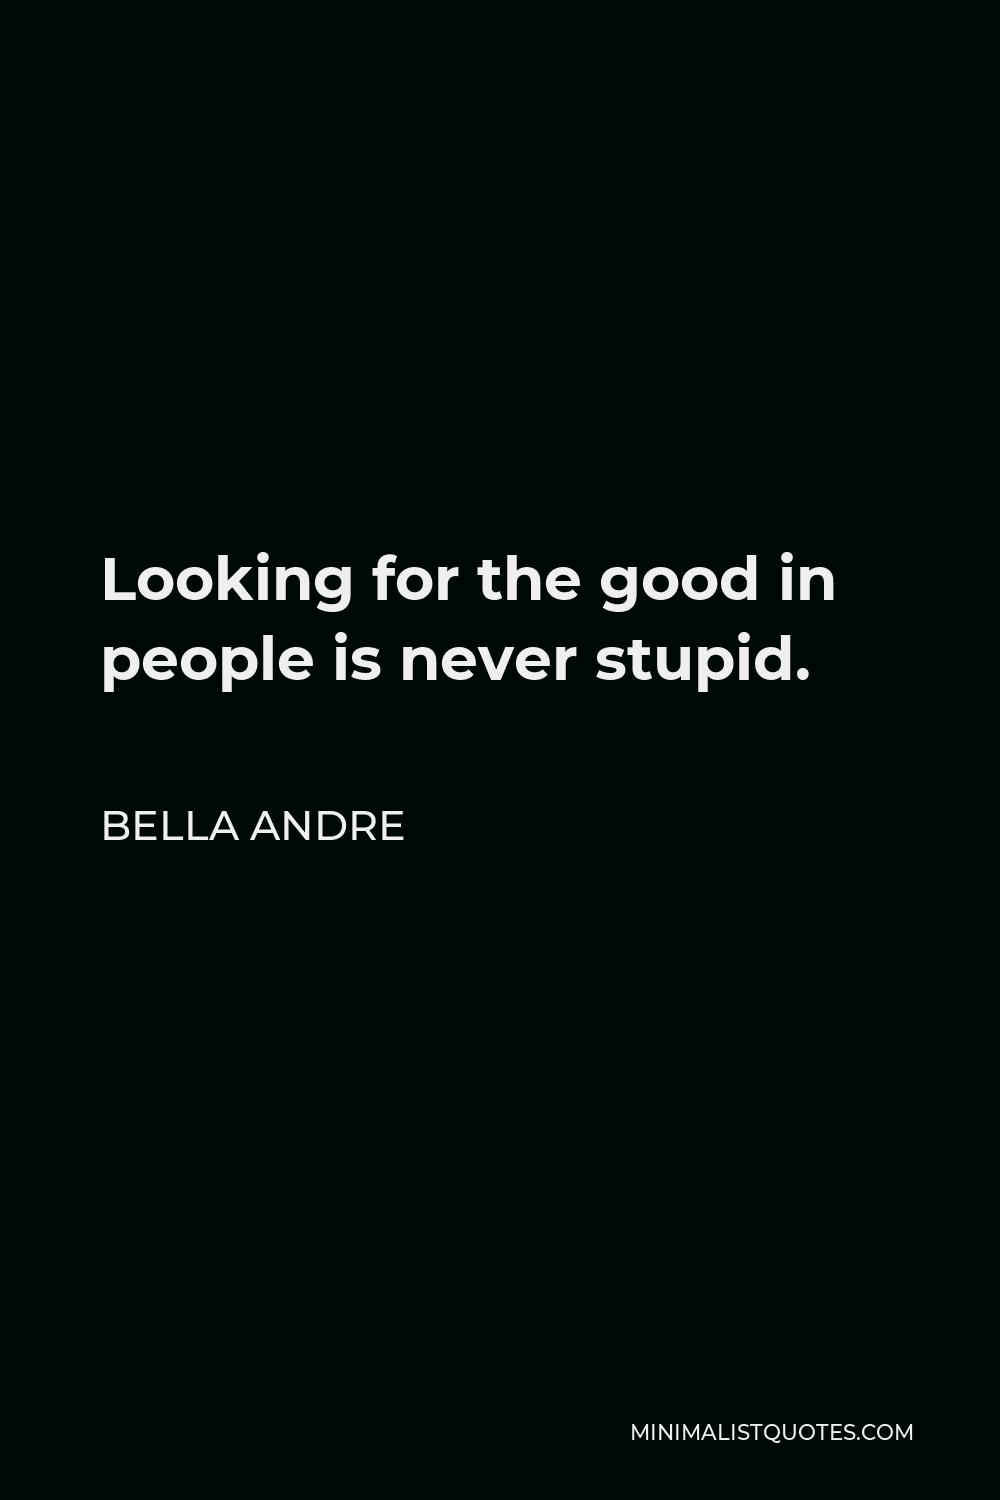 Bella Andre Quote - Looking for the good in people is never stupid.